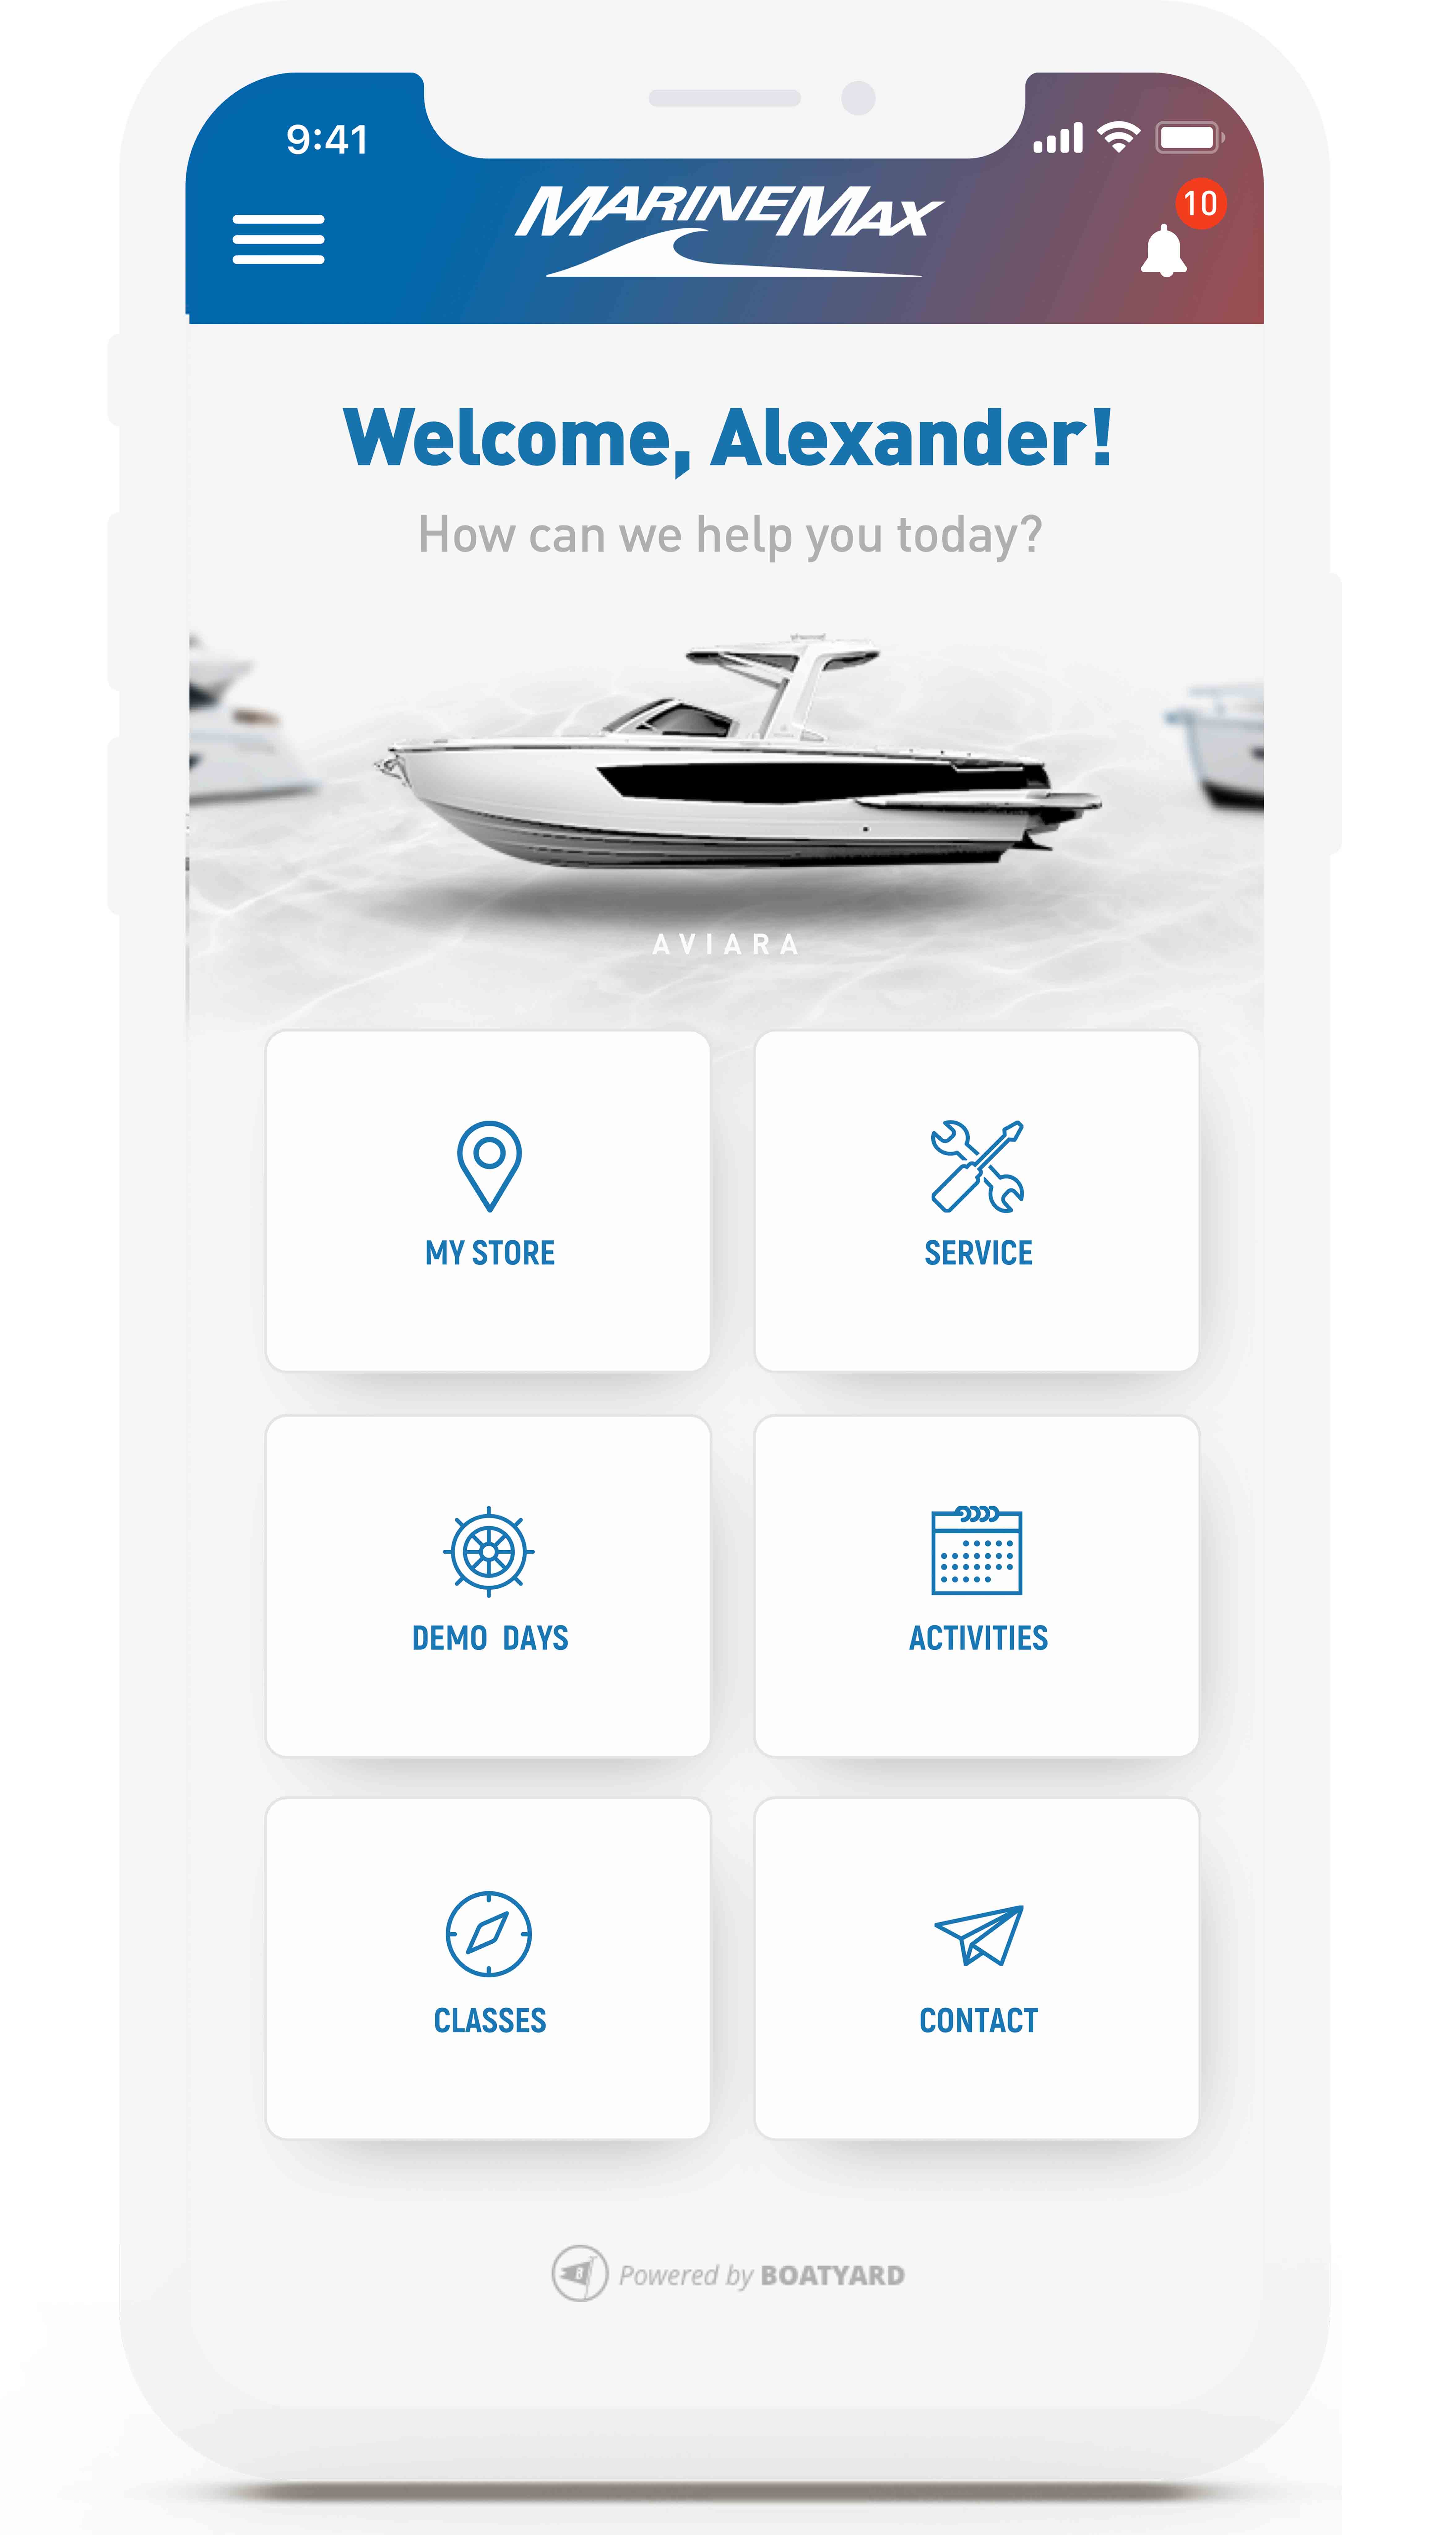 The MarineMax app home screen on a smartphone